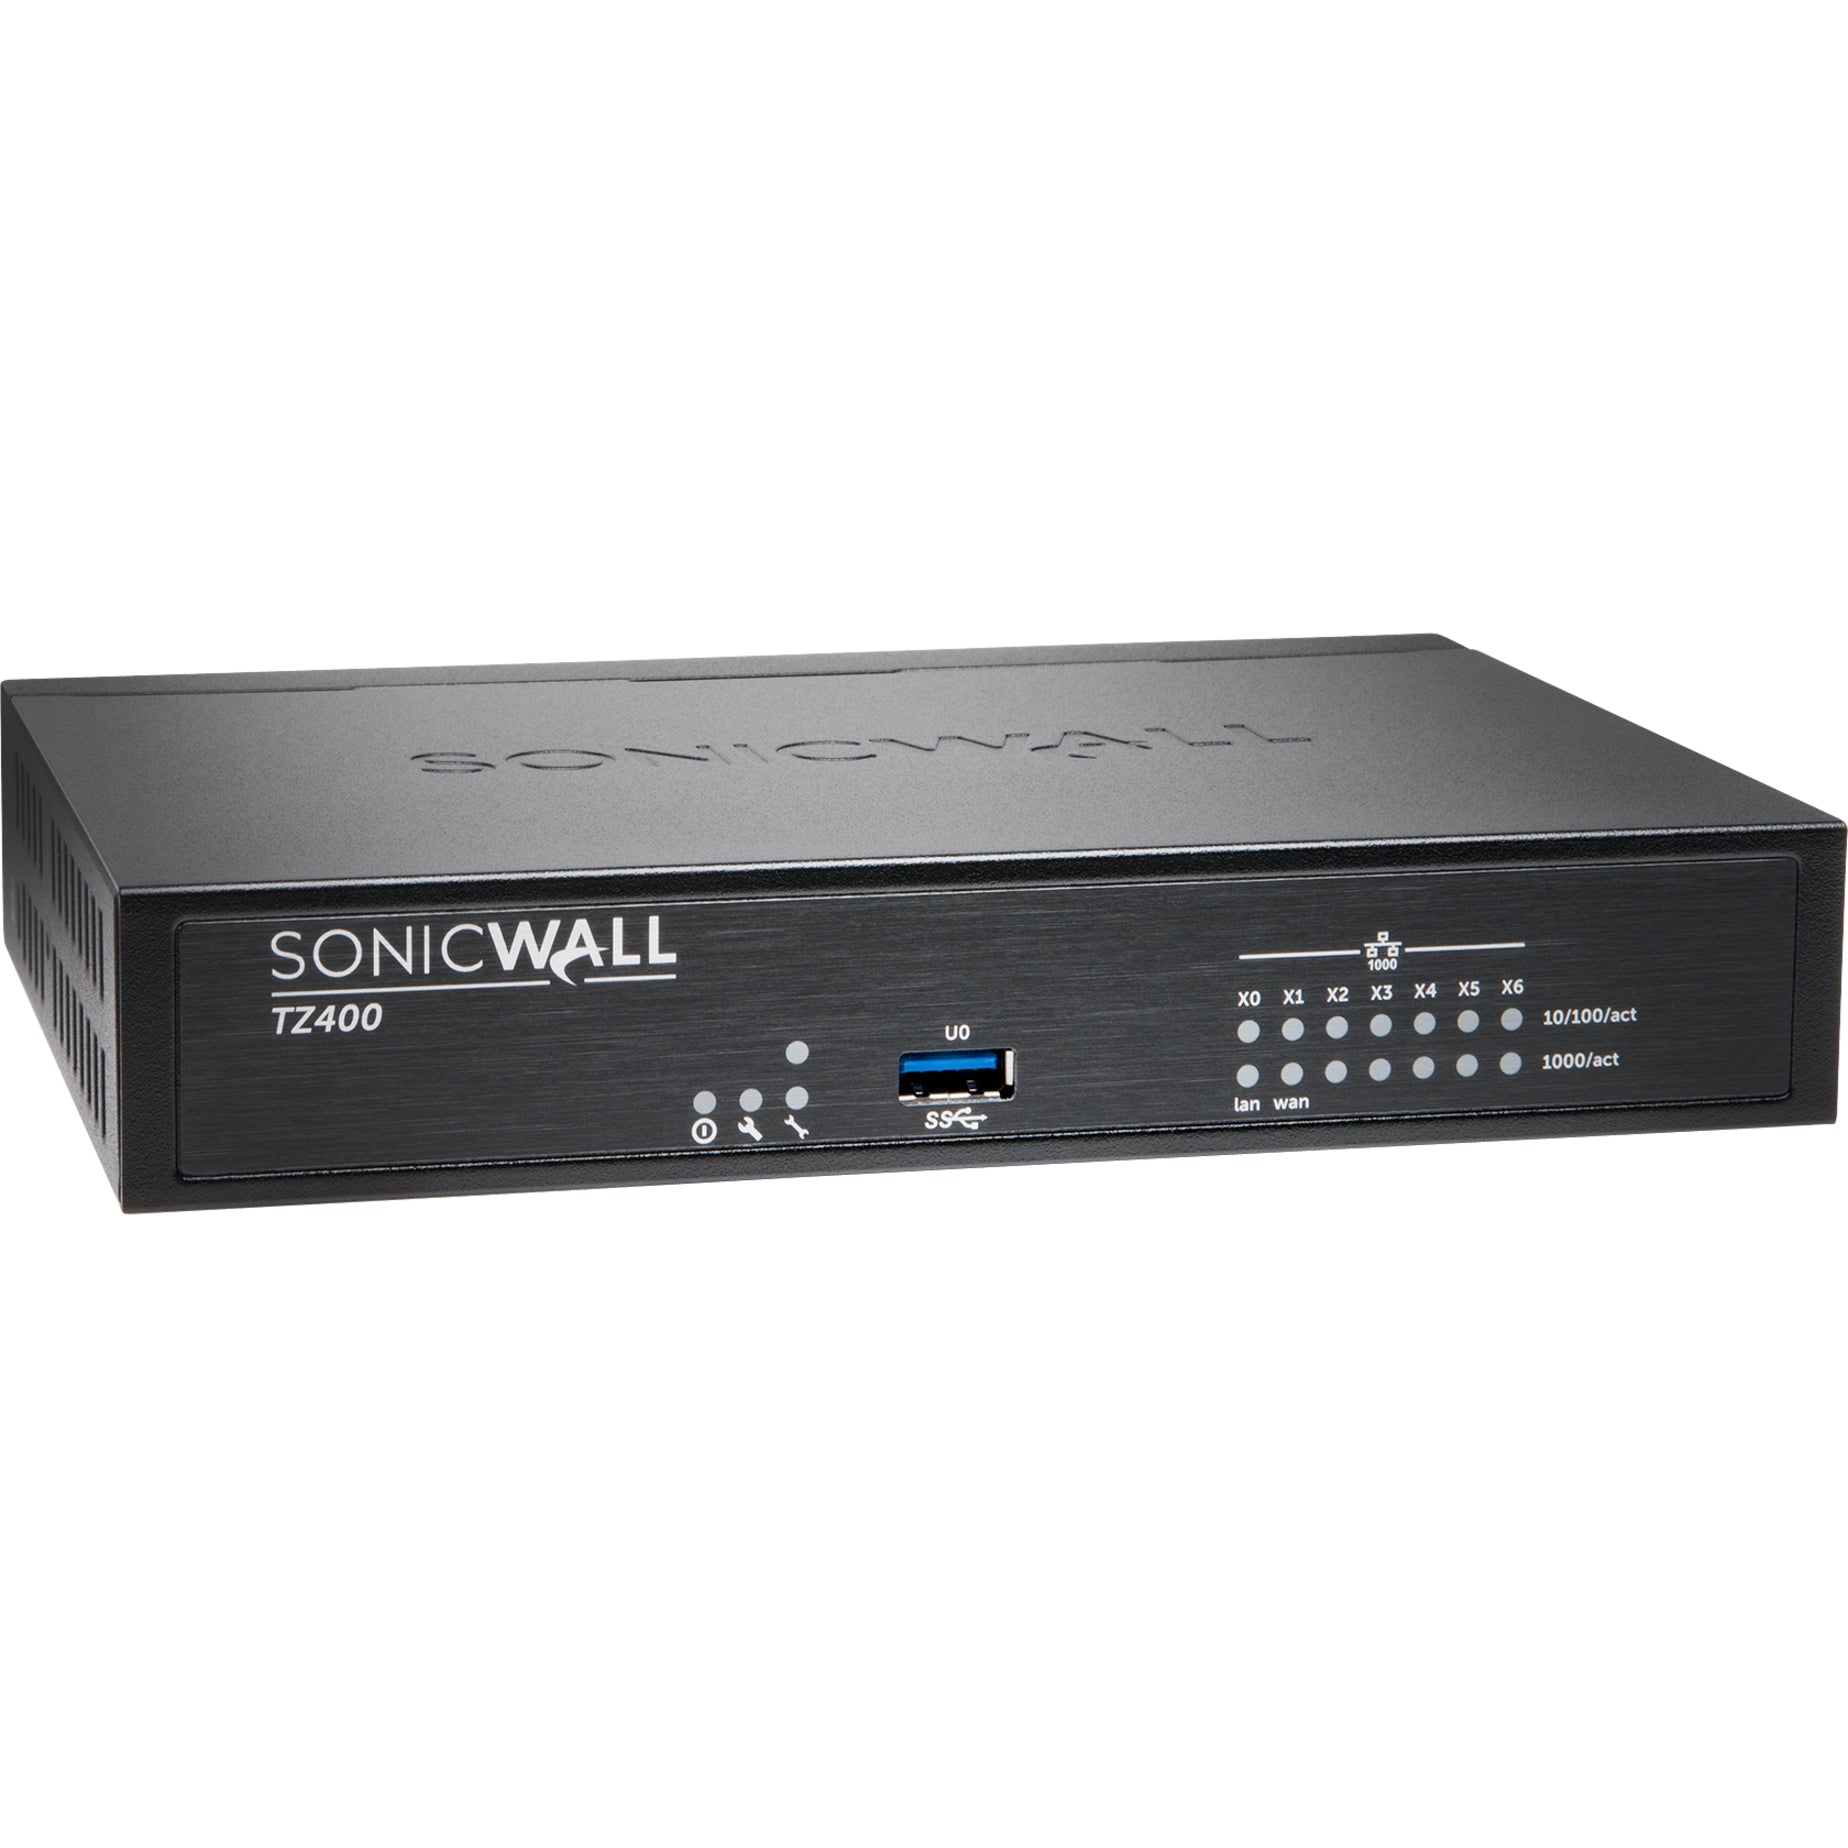 SonicWall TZ400 Network Security/Firewall Appliance [Discontinued]